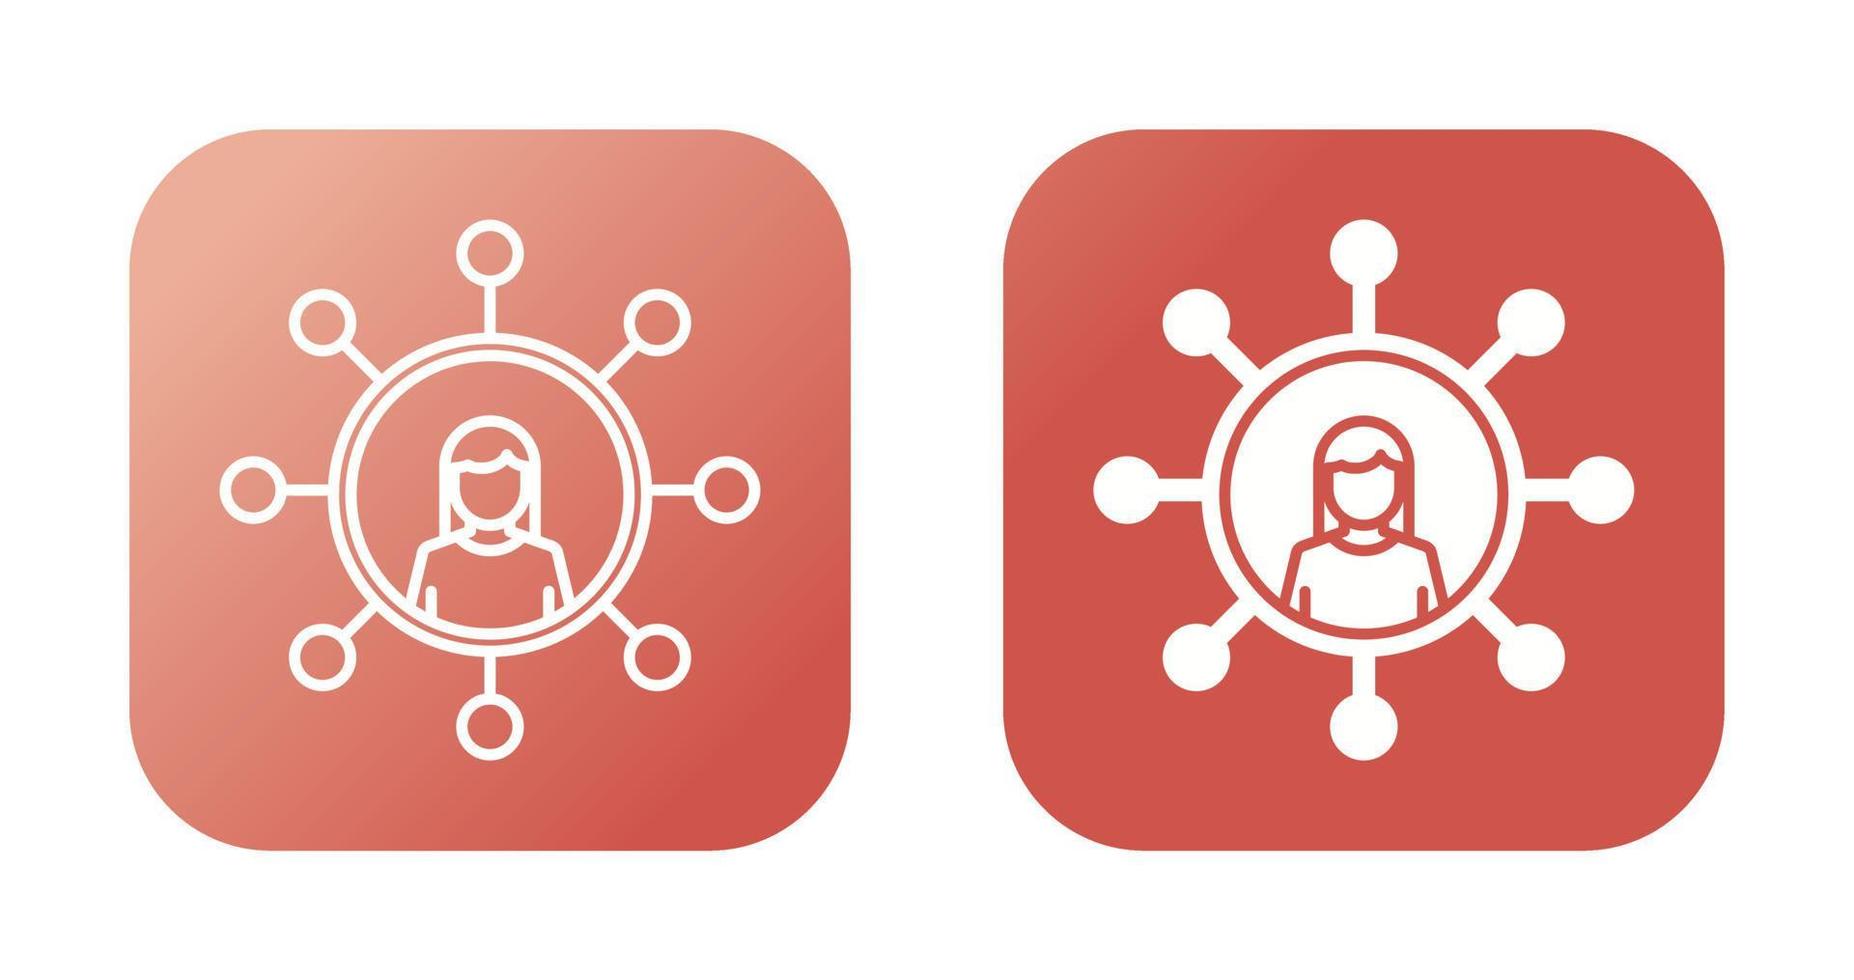 Personal Network Vector Icon